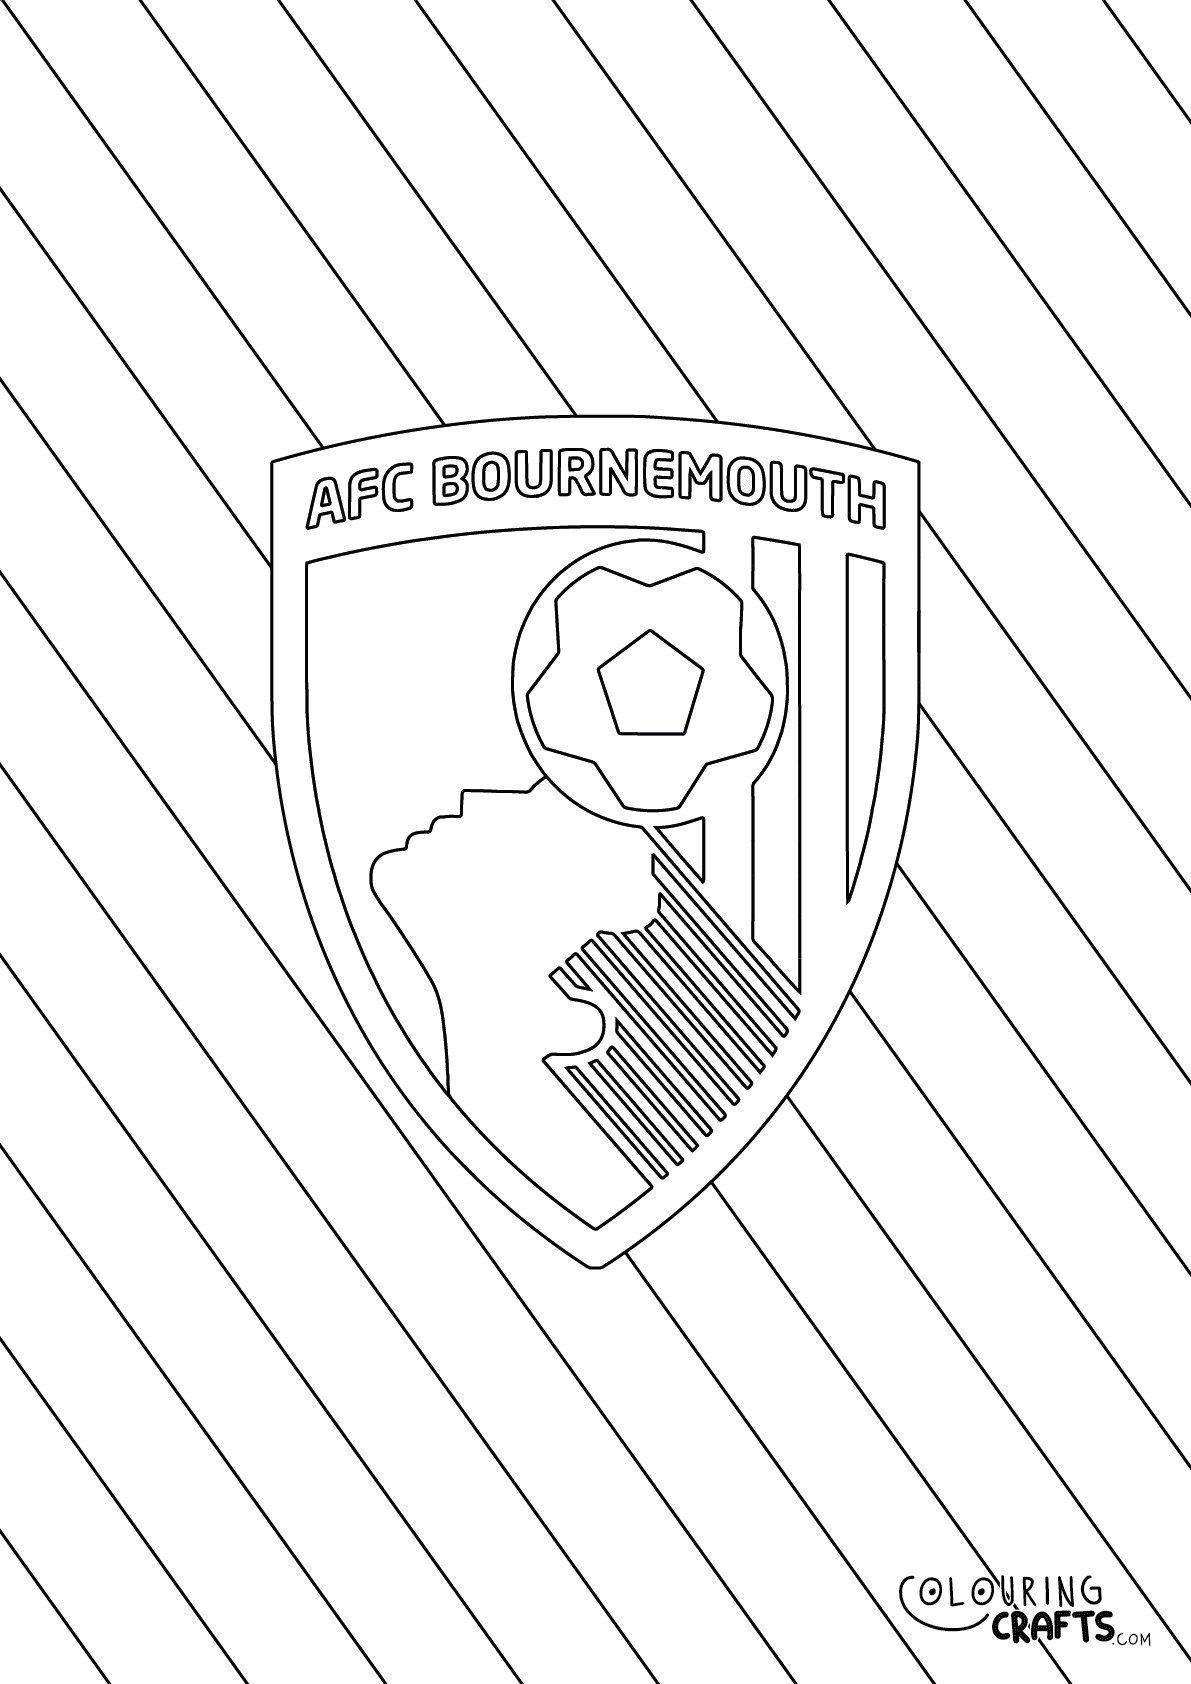 Striped AFC Bournemouth Badge Printable Colouring Page - Colouring Crafts